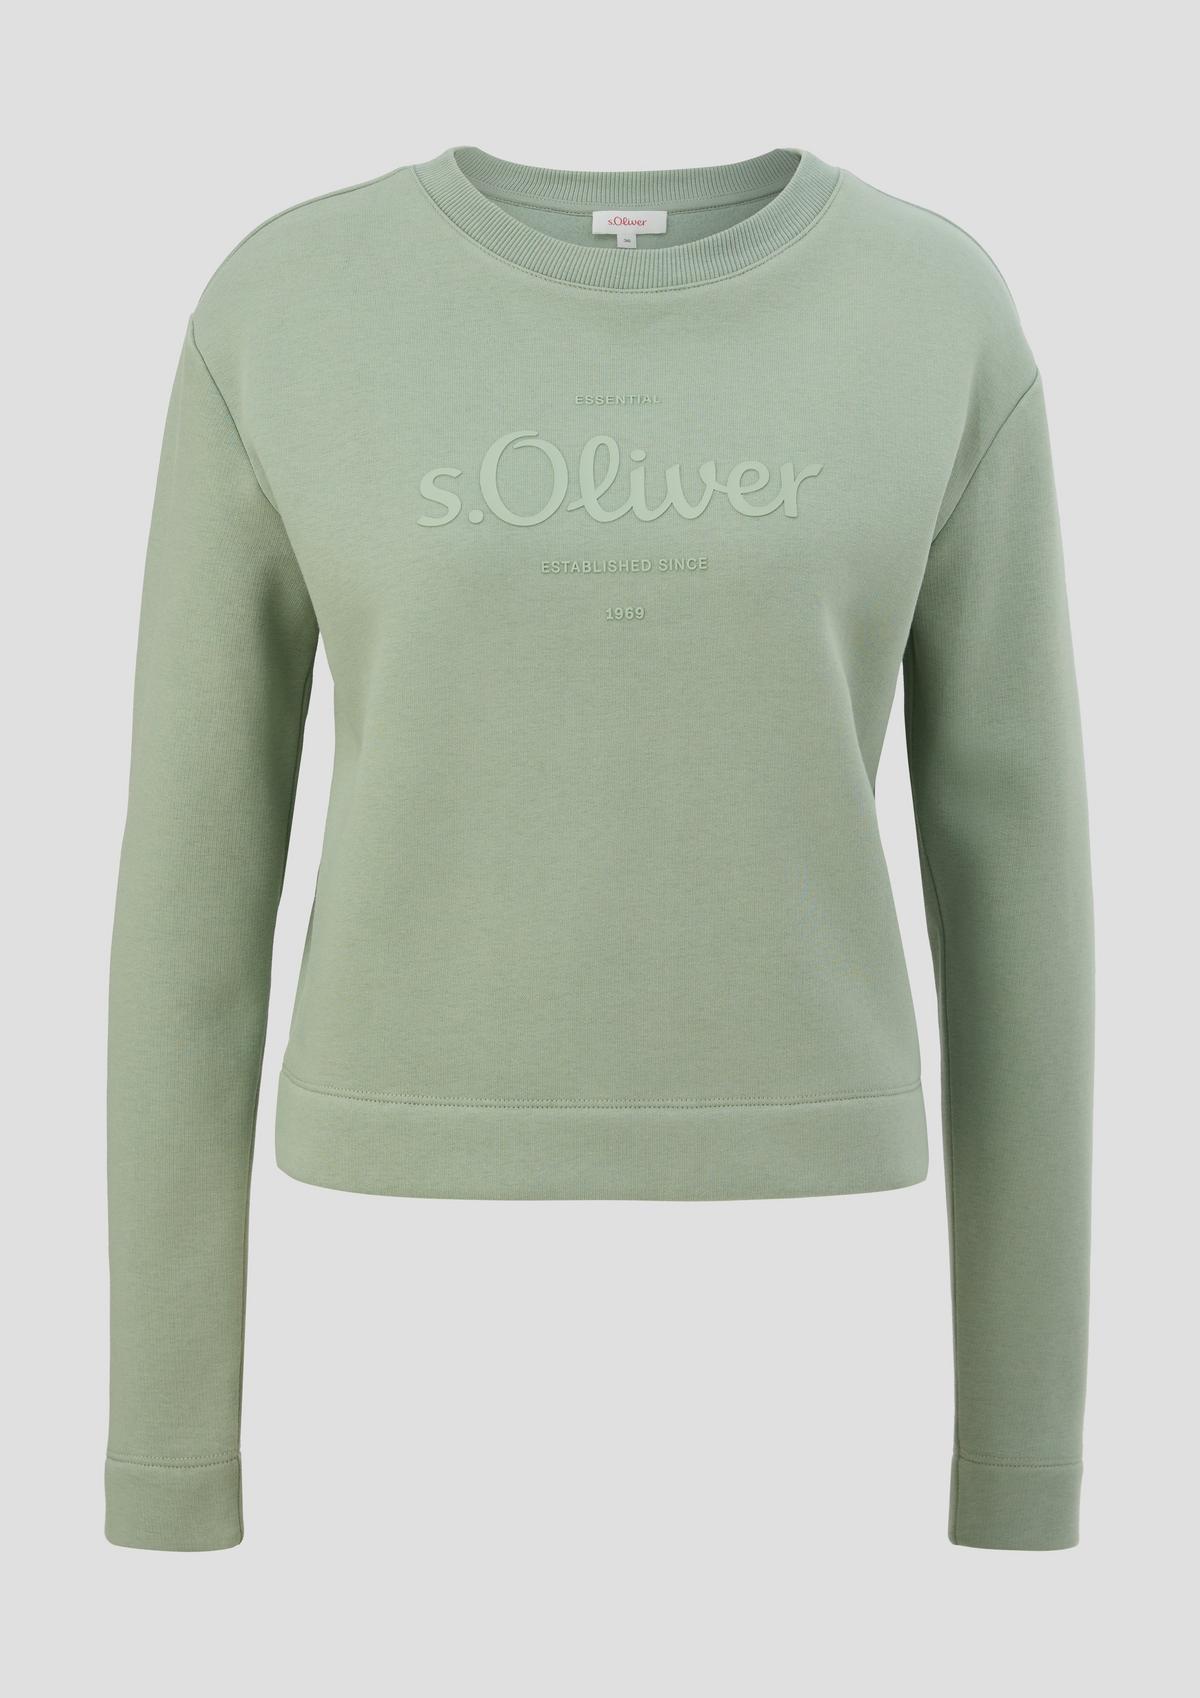 s.Oliver Sweatshirt with a logo print